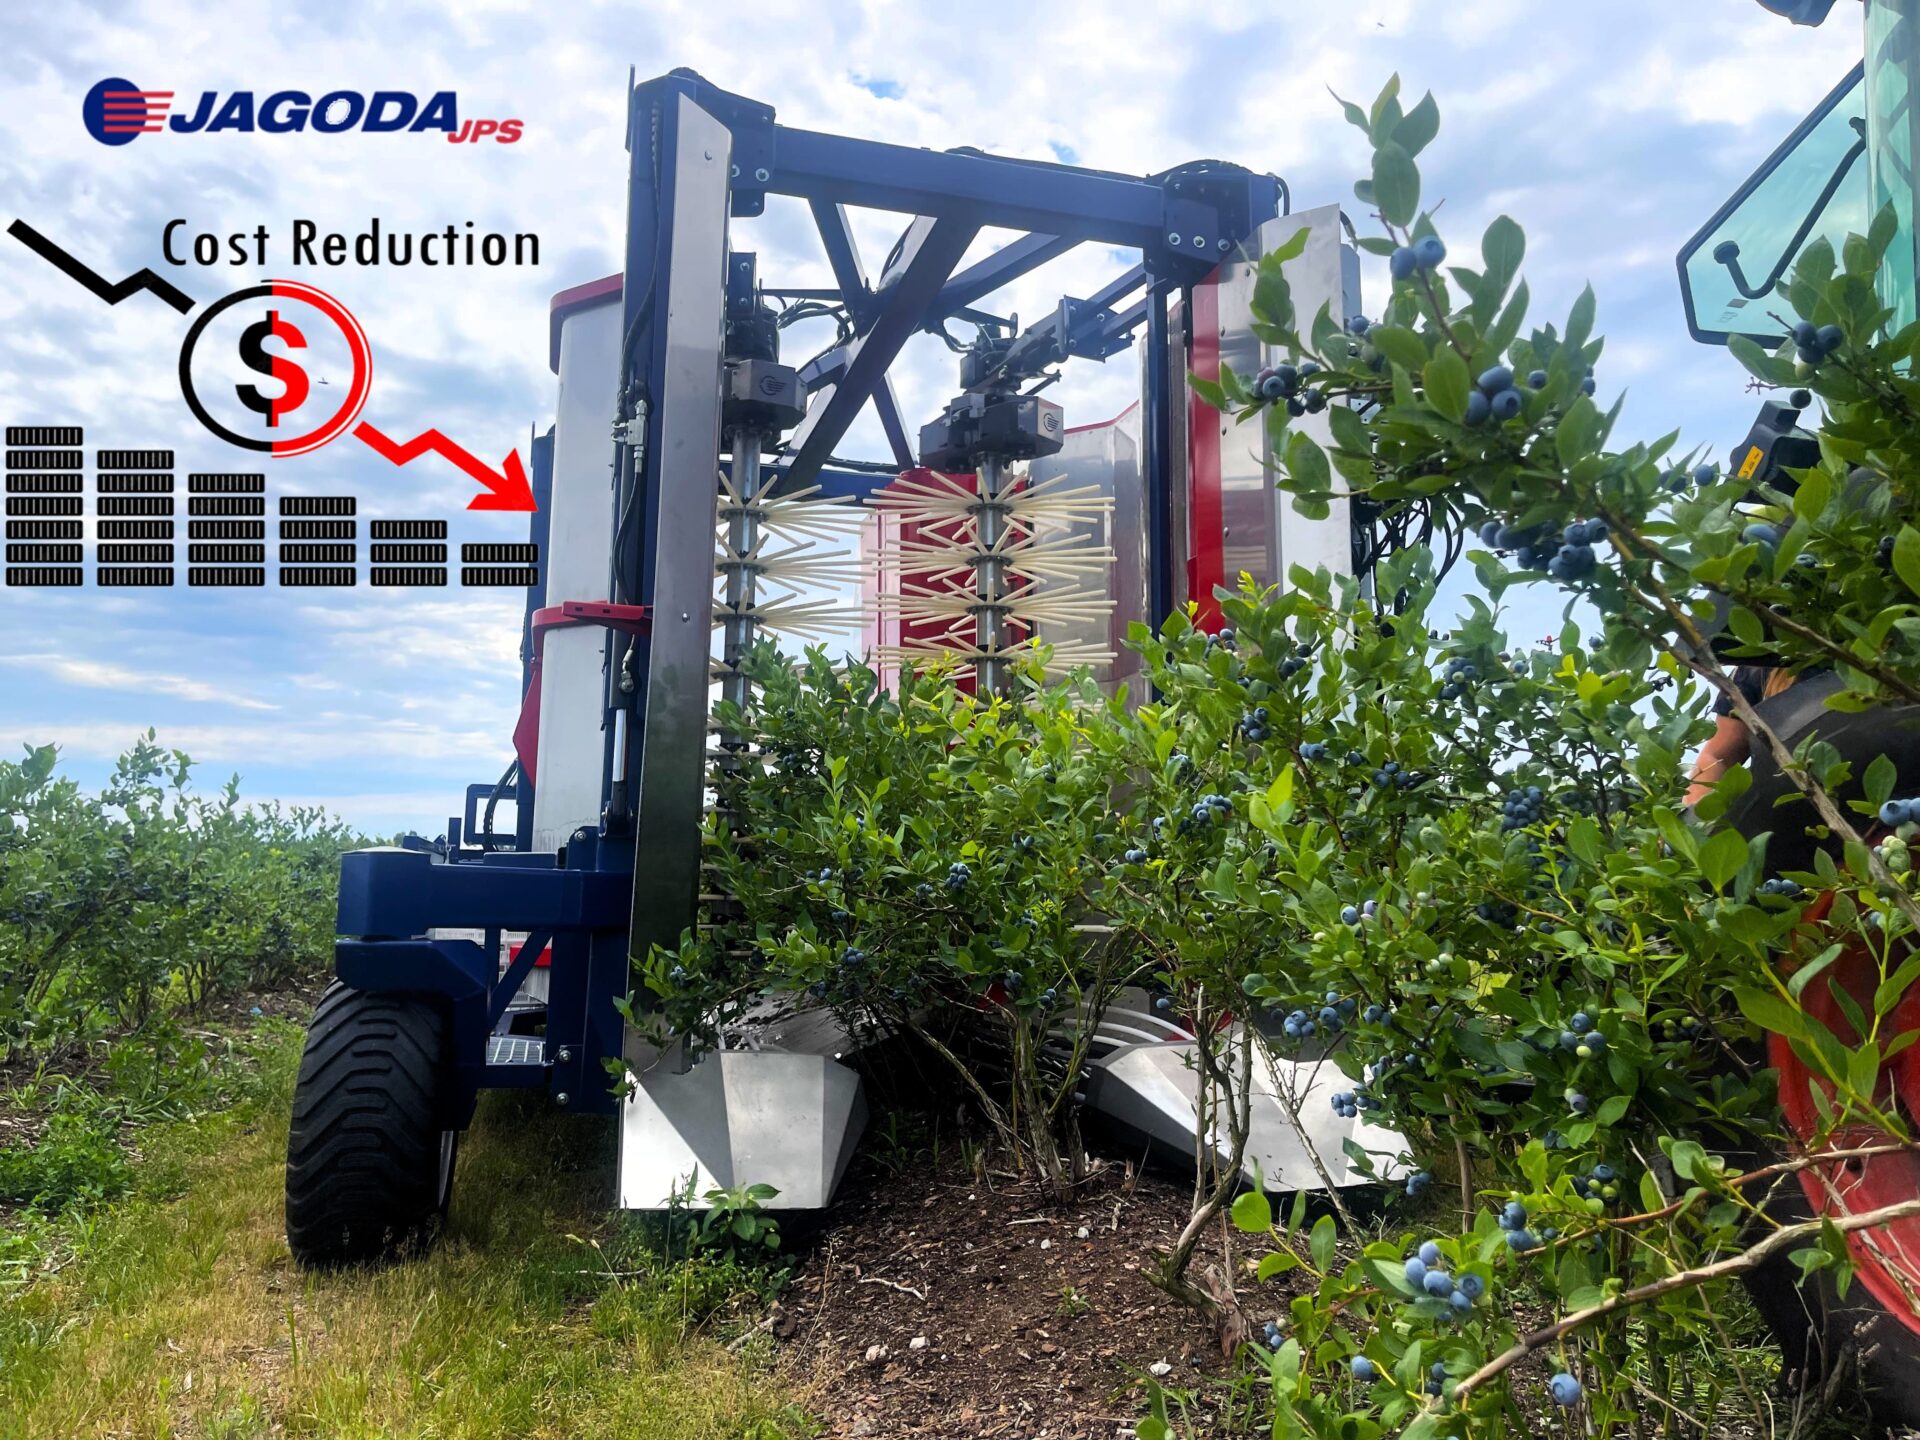 The JAGODA 300 pull-type blueberry harvester offers a cost-effective solution